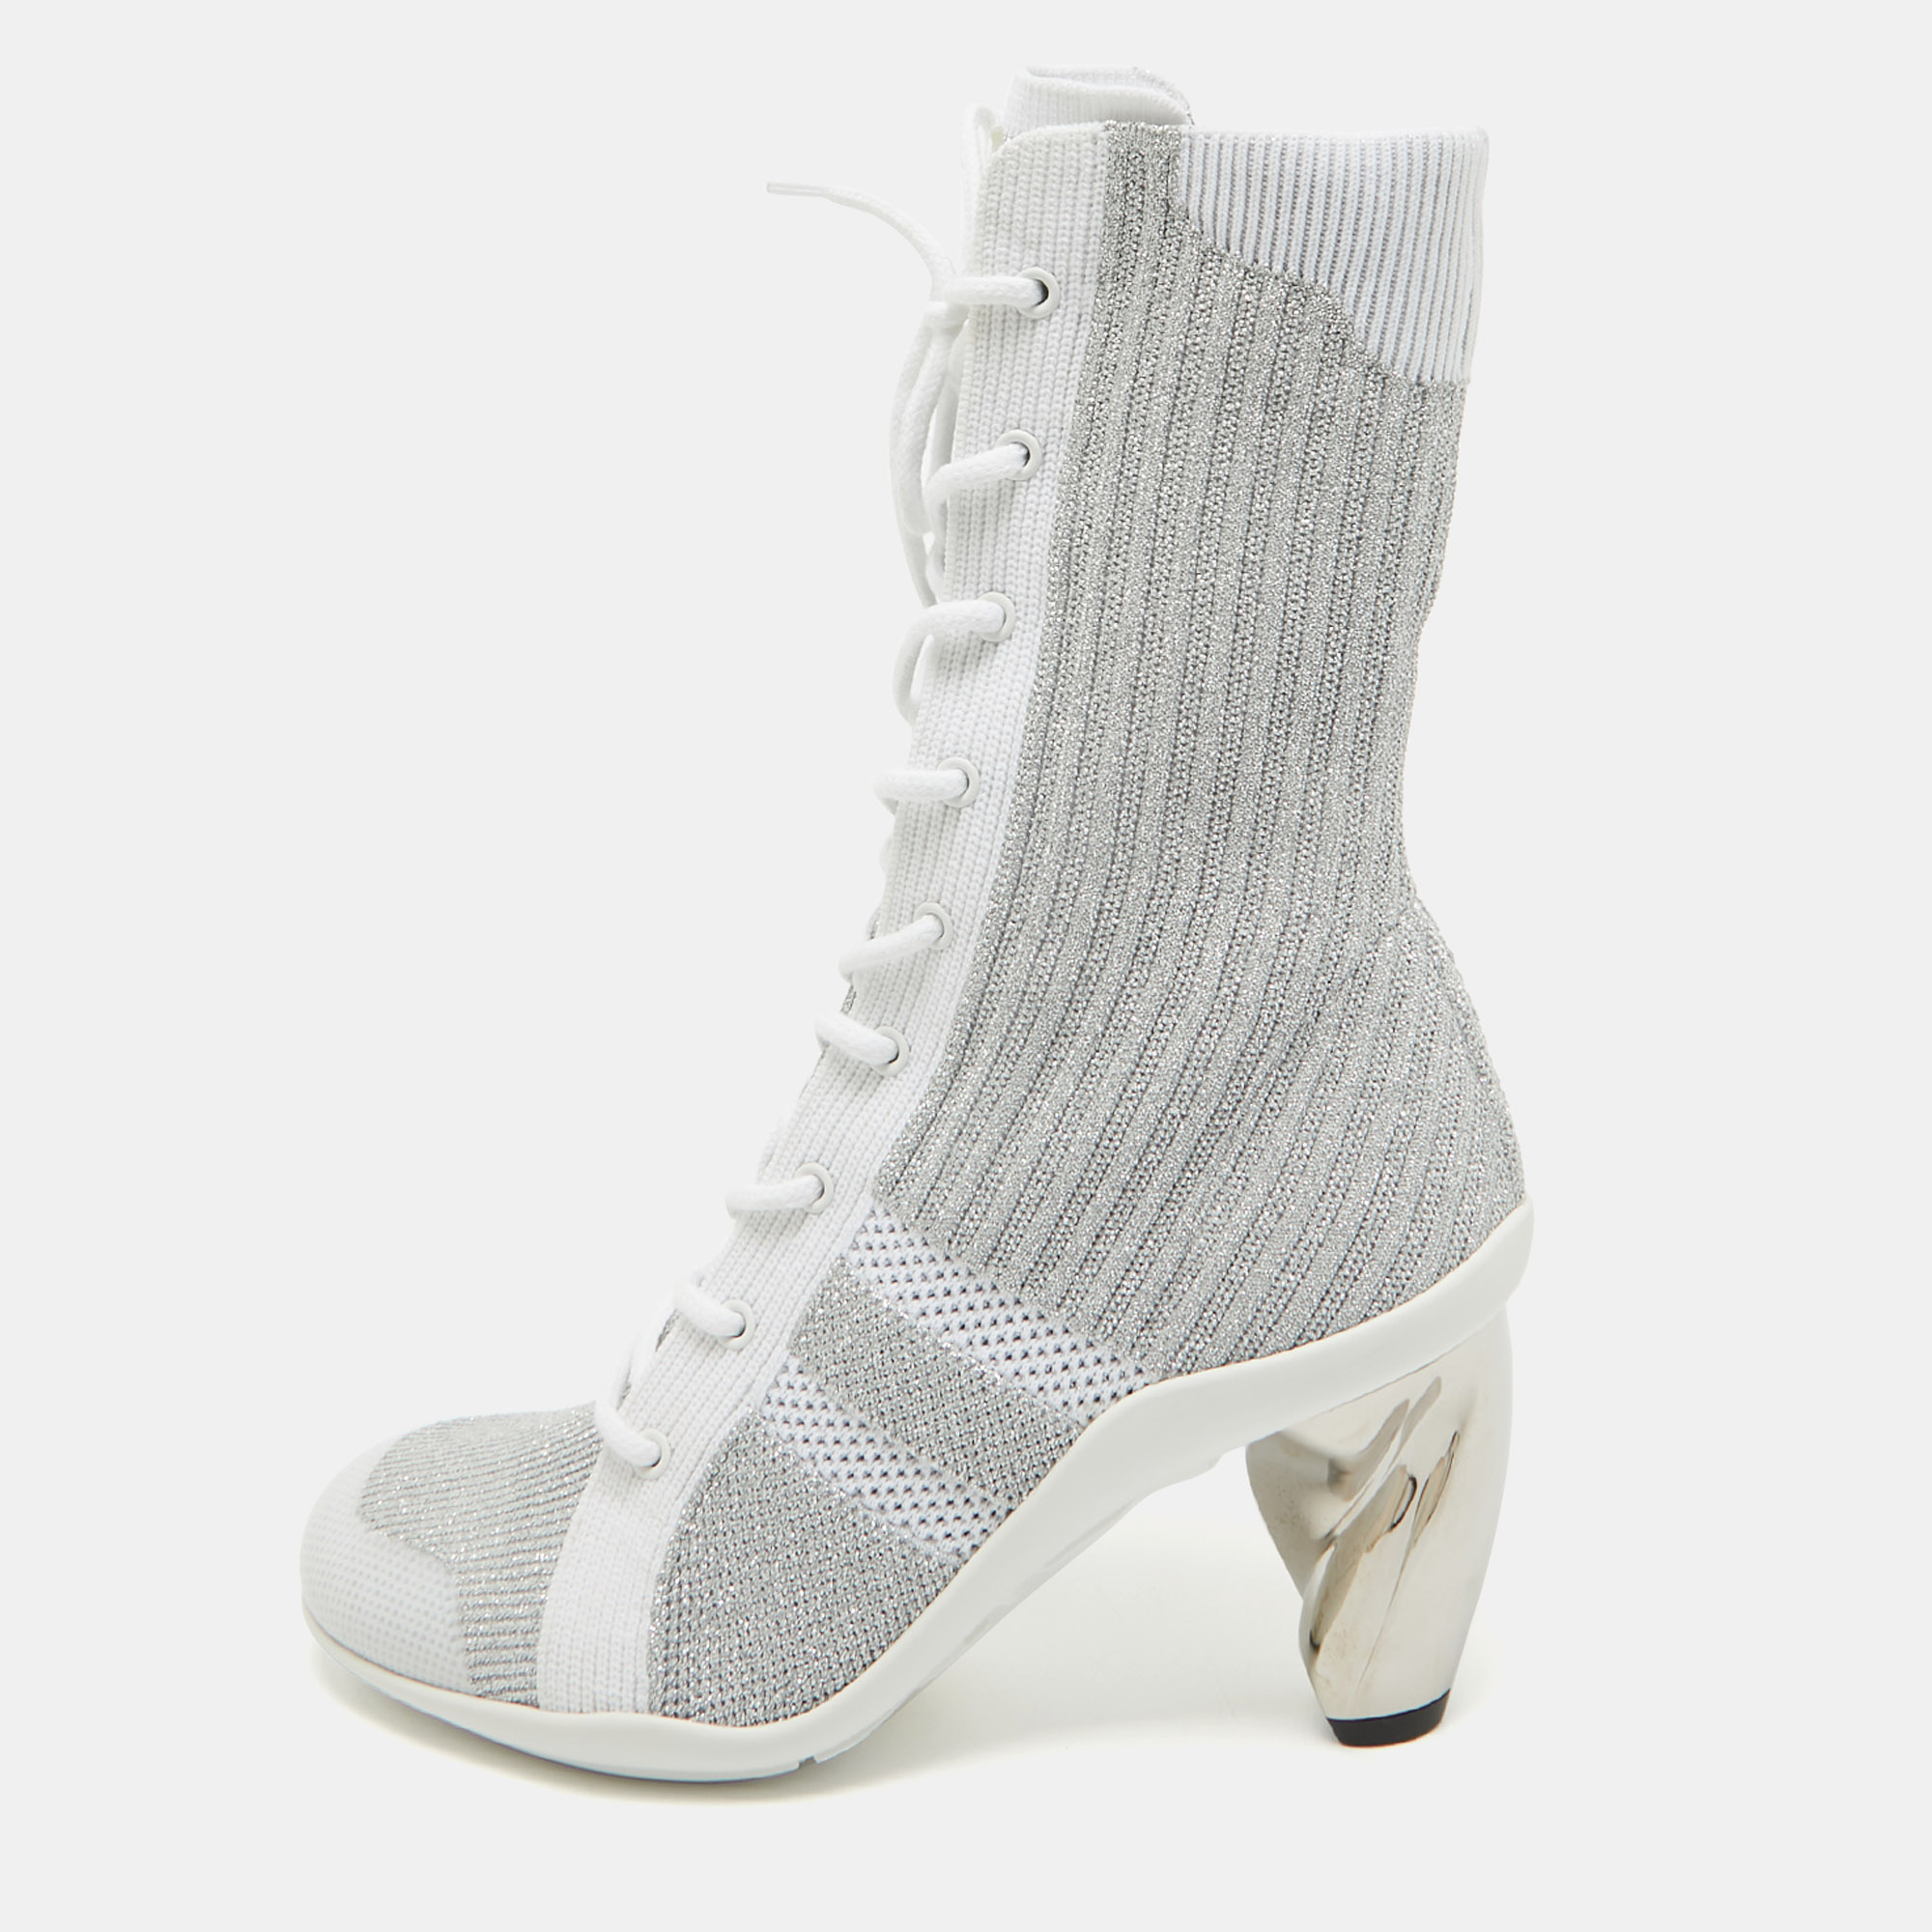 Dior silver knit fabric d-zenith ankle boots size 37.5